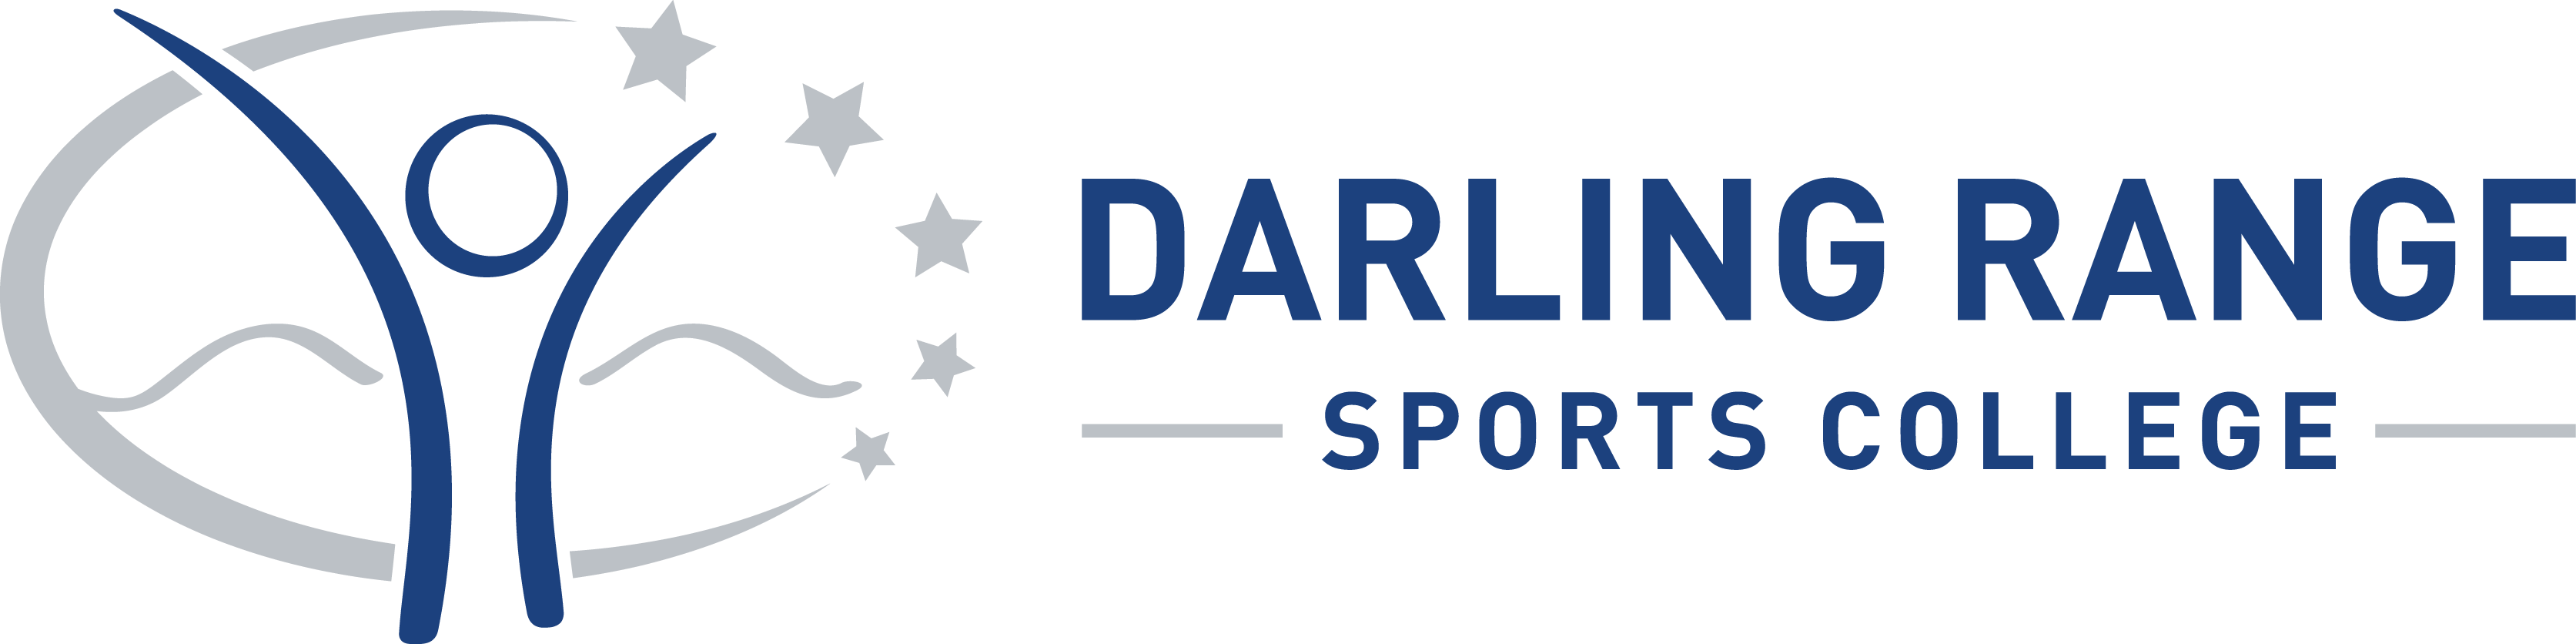 years-5-and-6-parent-information-session-tickets-darling-range-sports